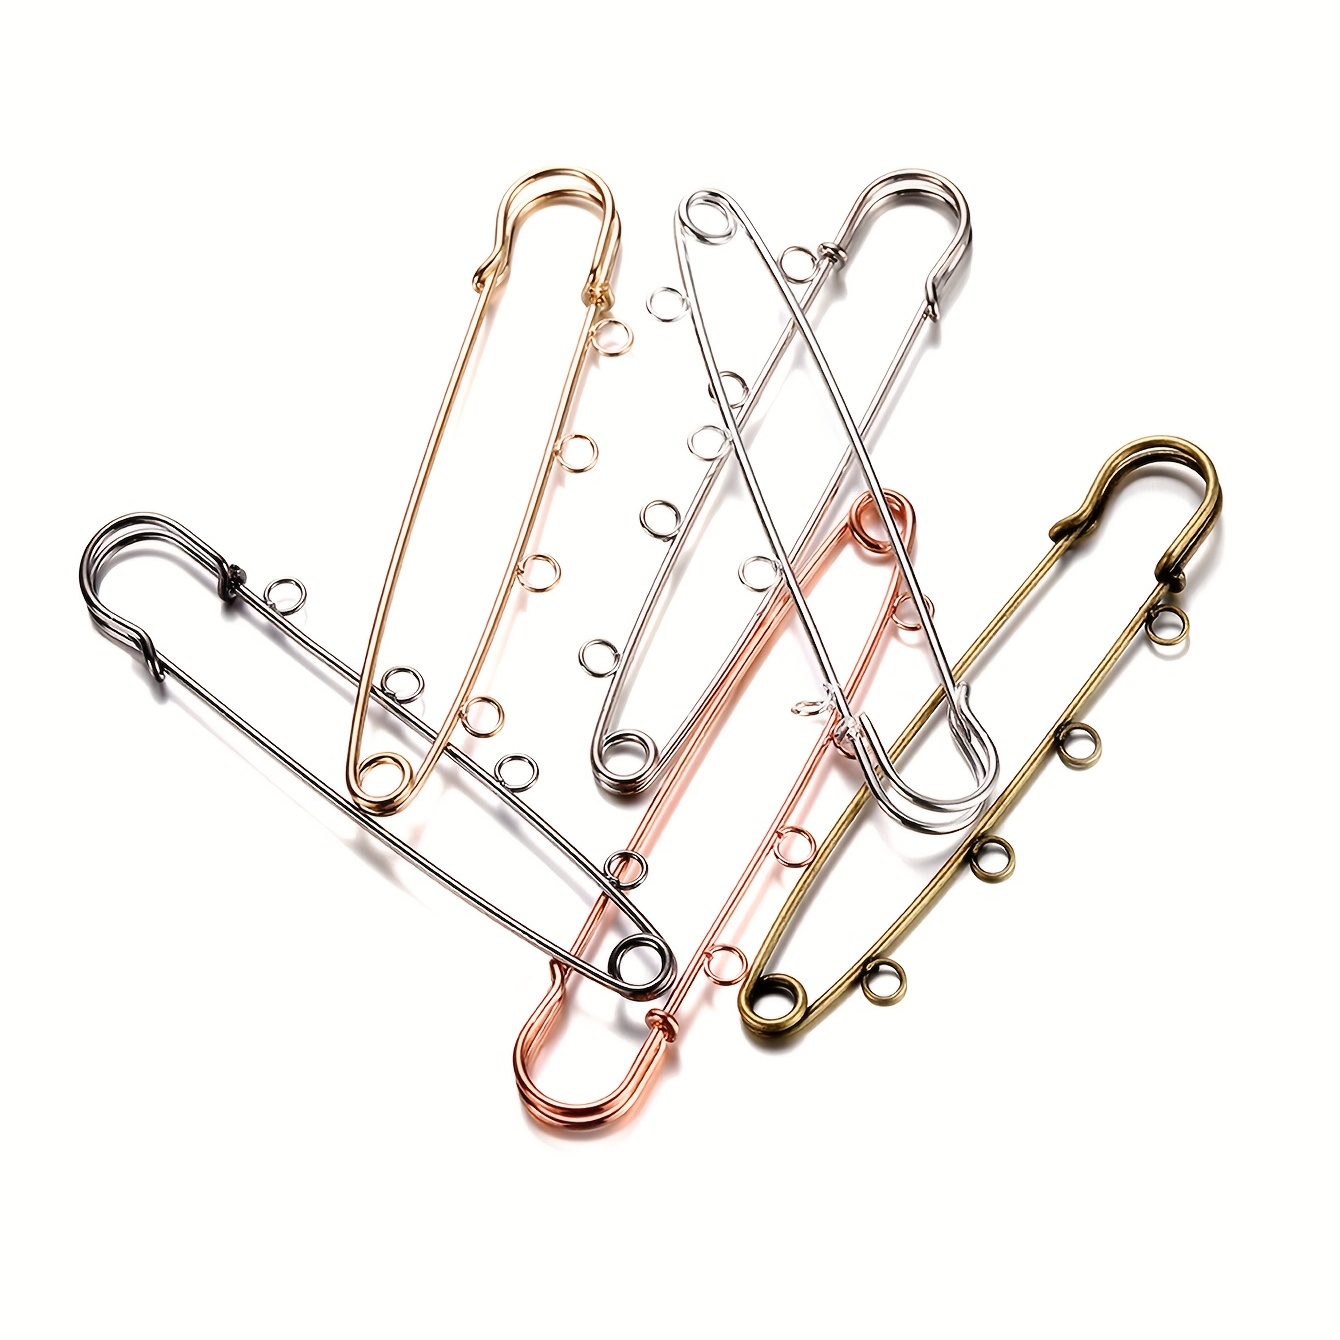 20pcs Platinum Iron Heavy Duty Safety Pins 2 Inch With 3 Loops Metal Kilt  Pins F